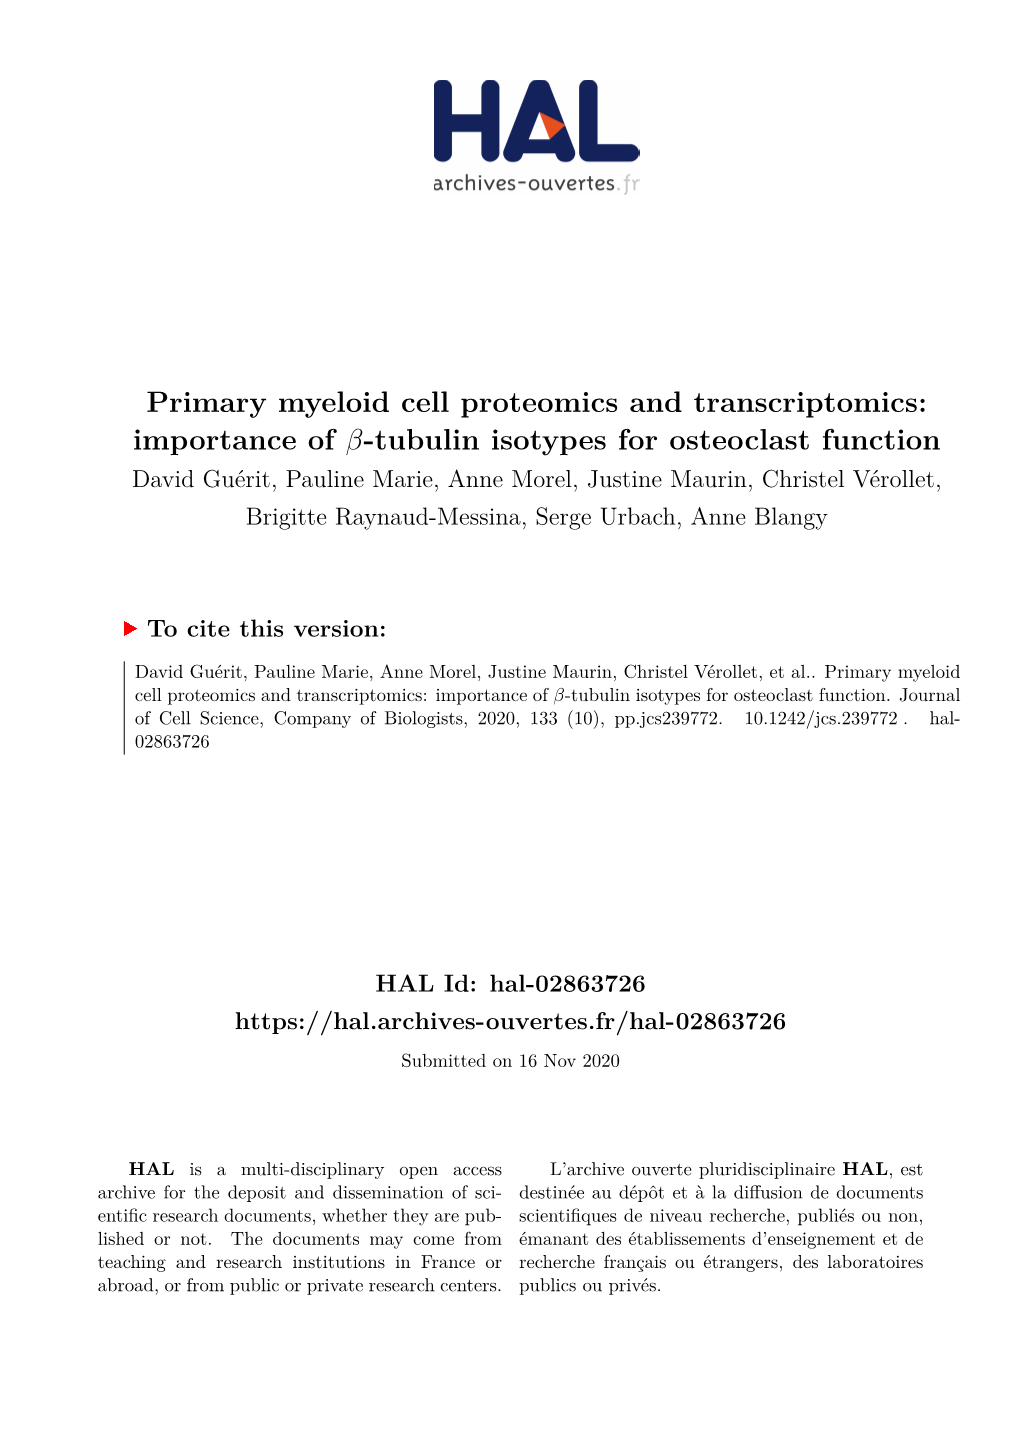 Primary Myeloid Cell Proteomics and Transcriptomics